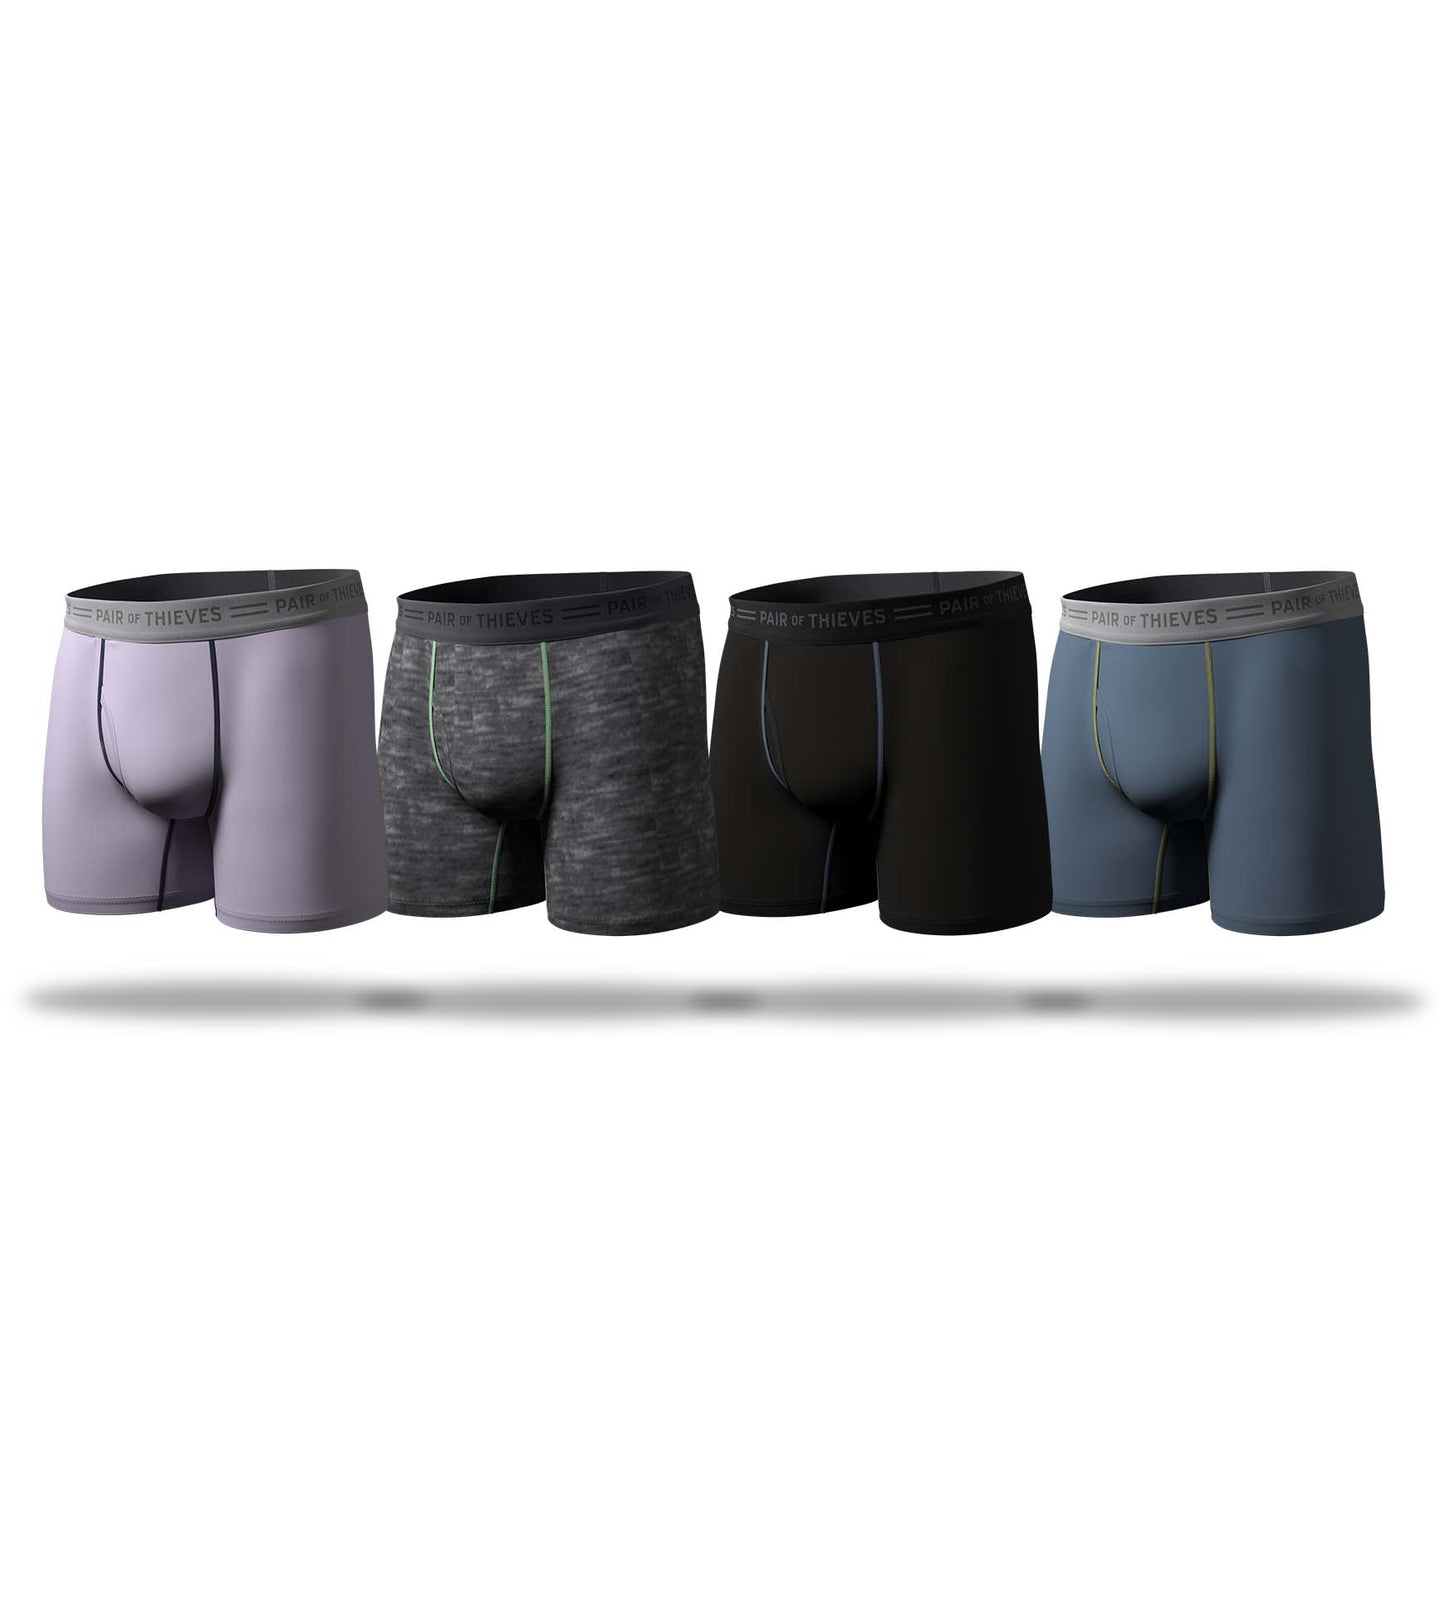 Every Day Kit Boxer Brief Bear Pack (16-pack) containing the colors Dark slate gray, Dark Gray, Black, Light Gray, Gray, Dark slate gray, Dim gray, Dark Gray, Black